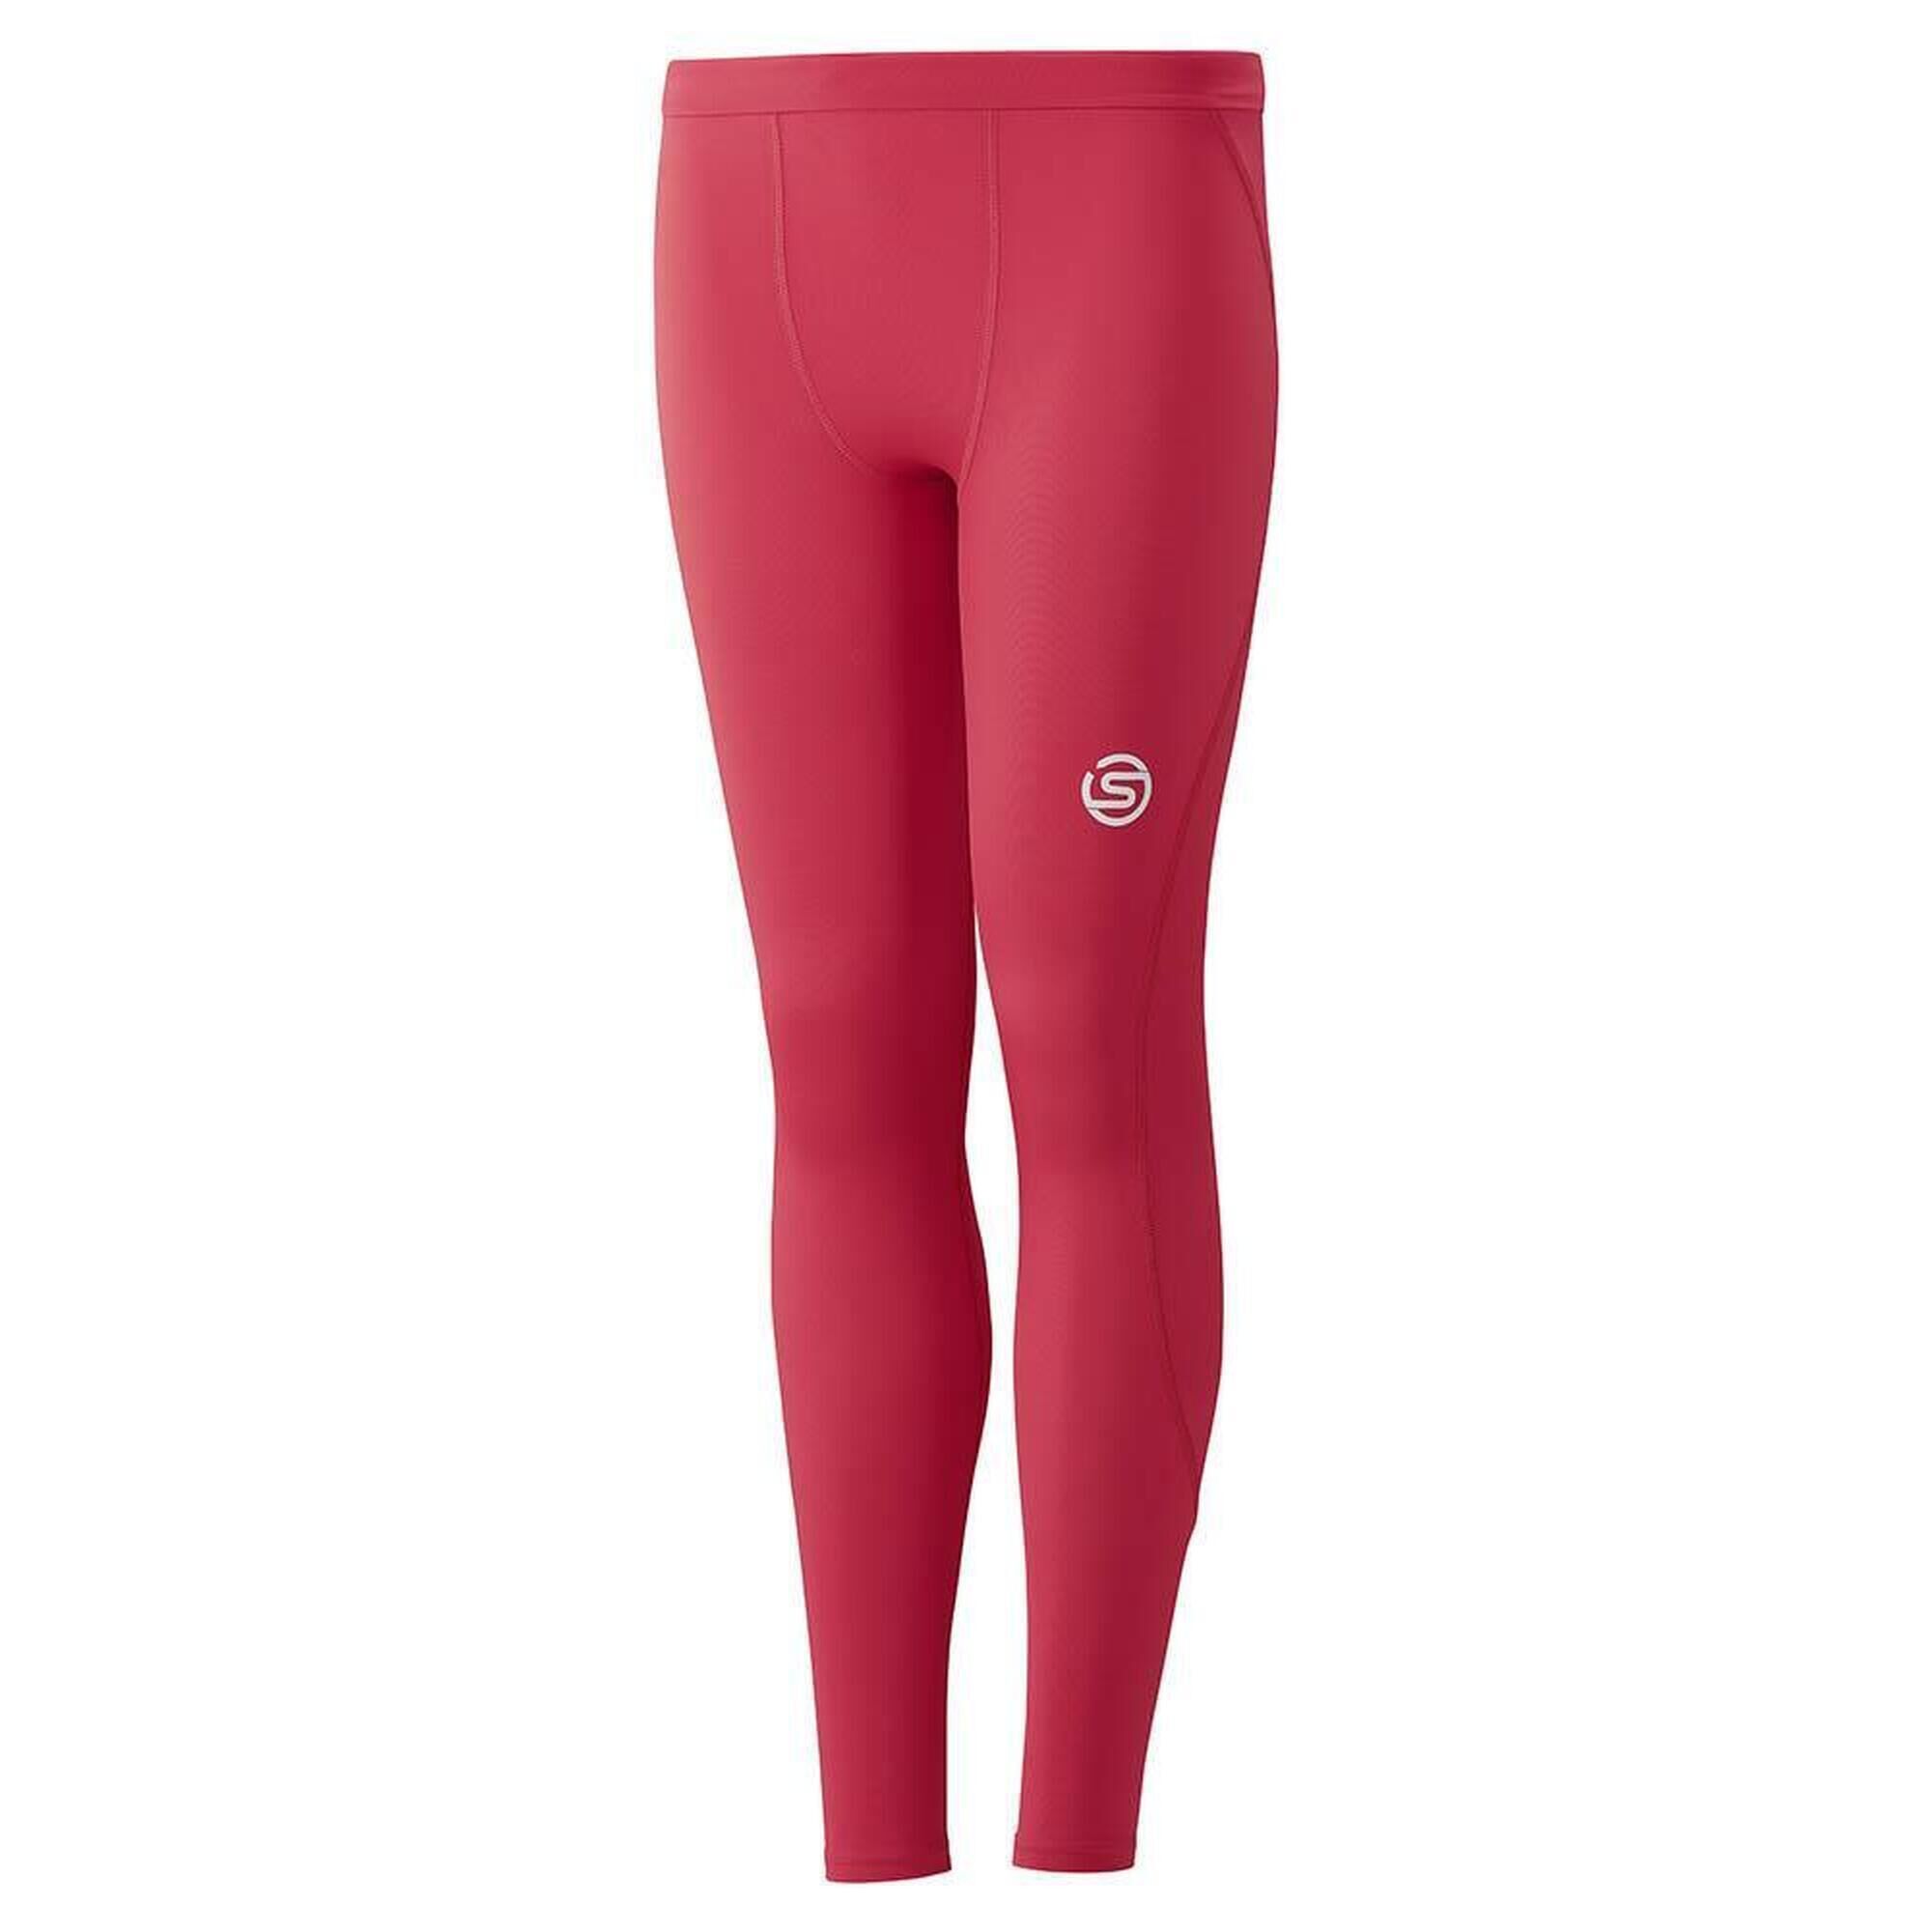 SKINS SKINS Series-1 Youth Tight - Red - Size S